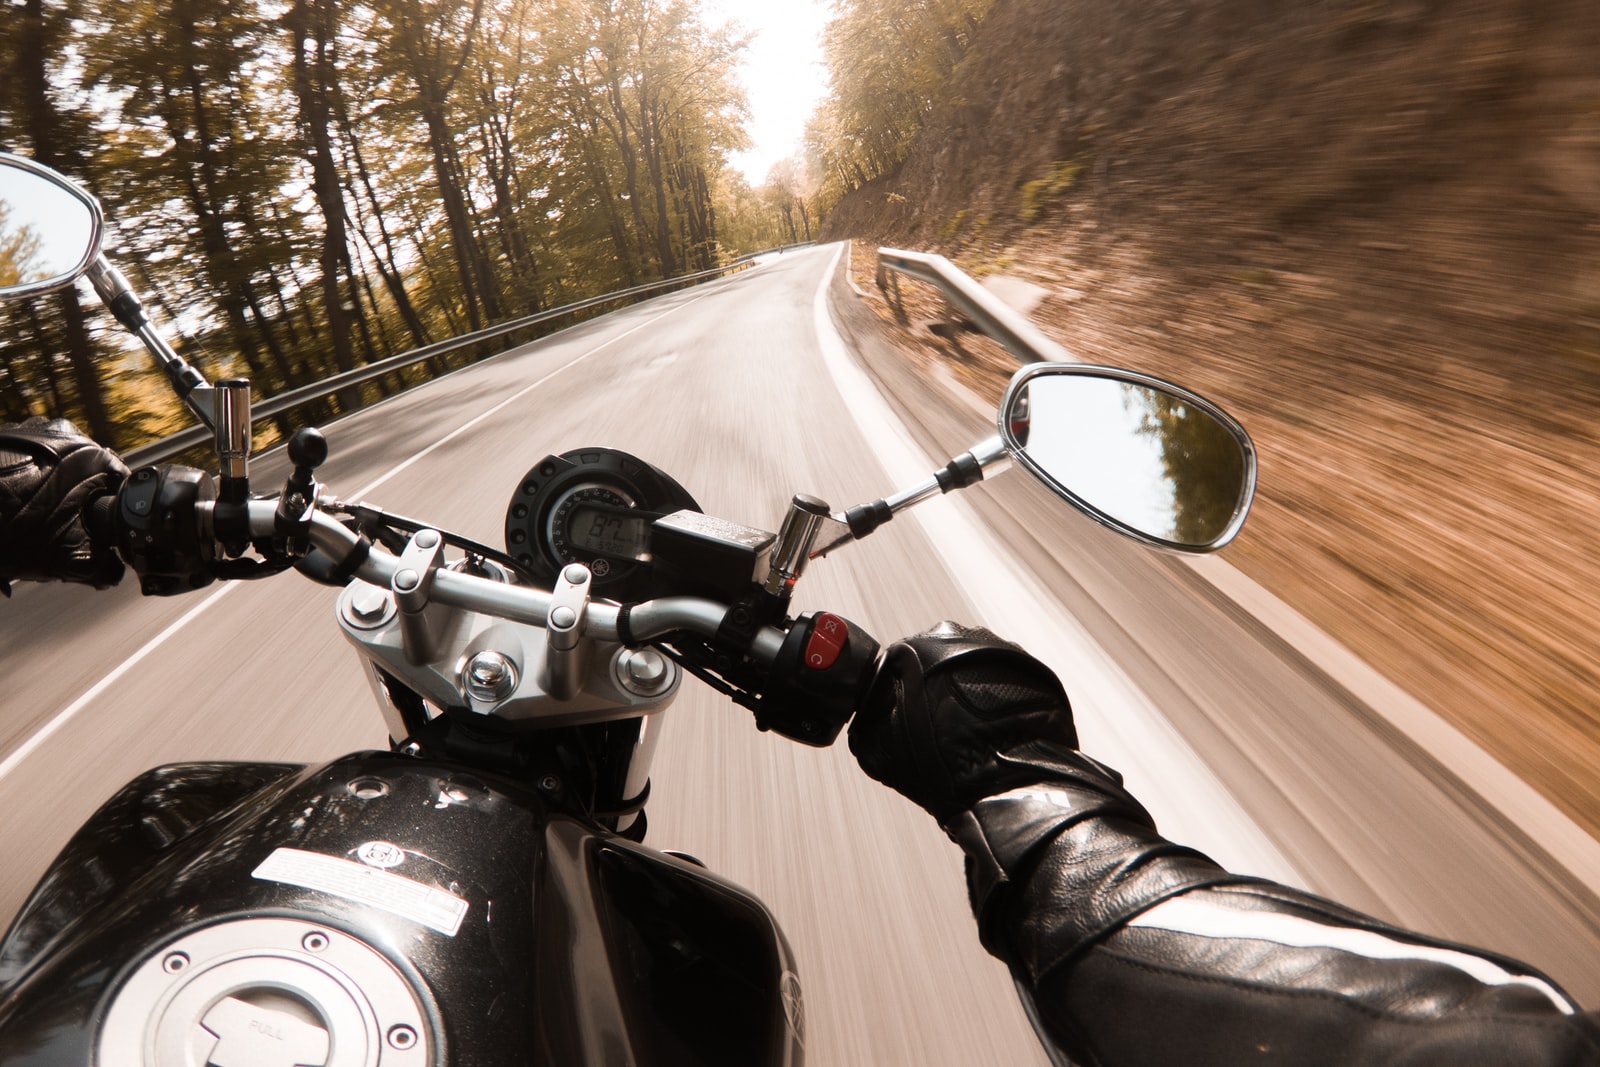 5 Tips to Help Avoid Car and Motorcycle Accidents